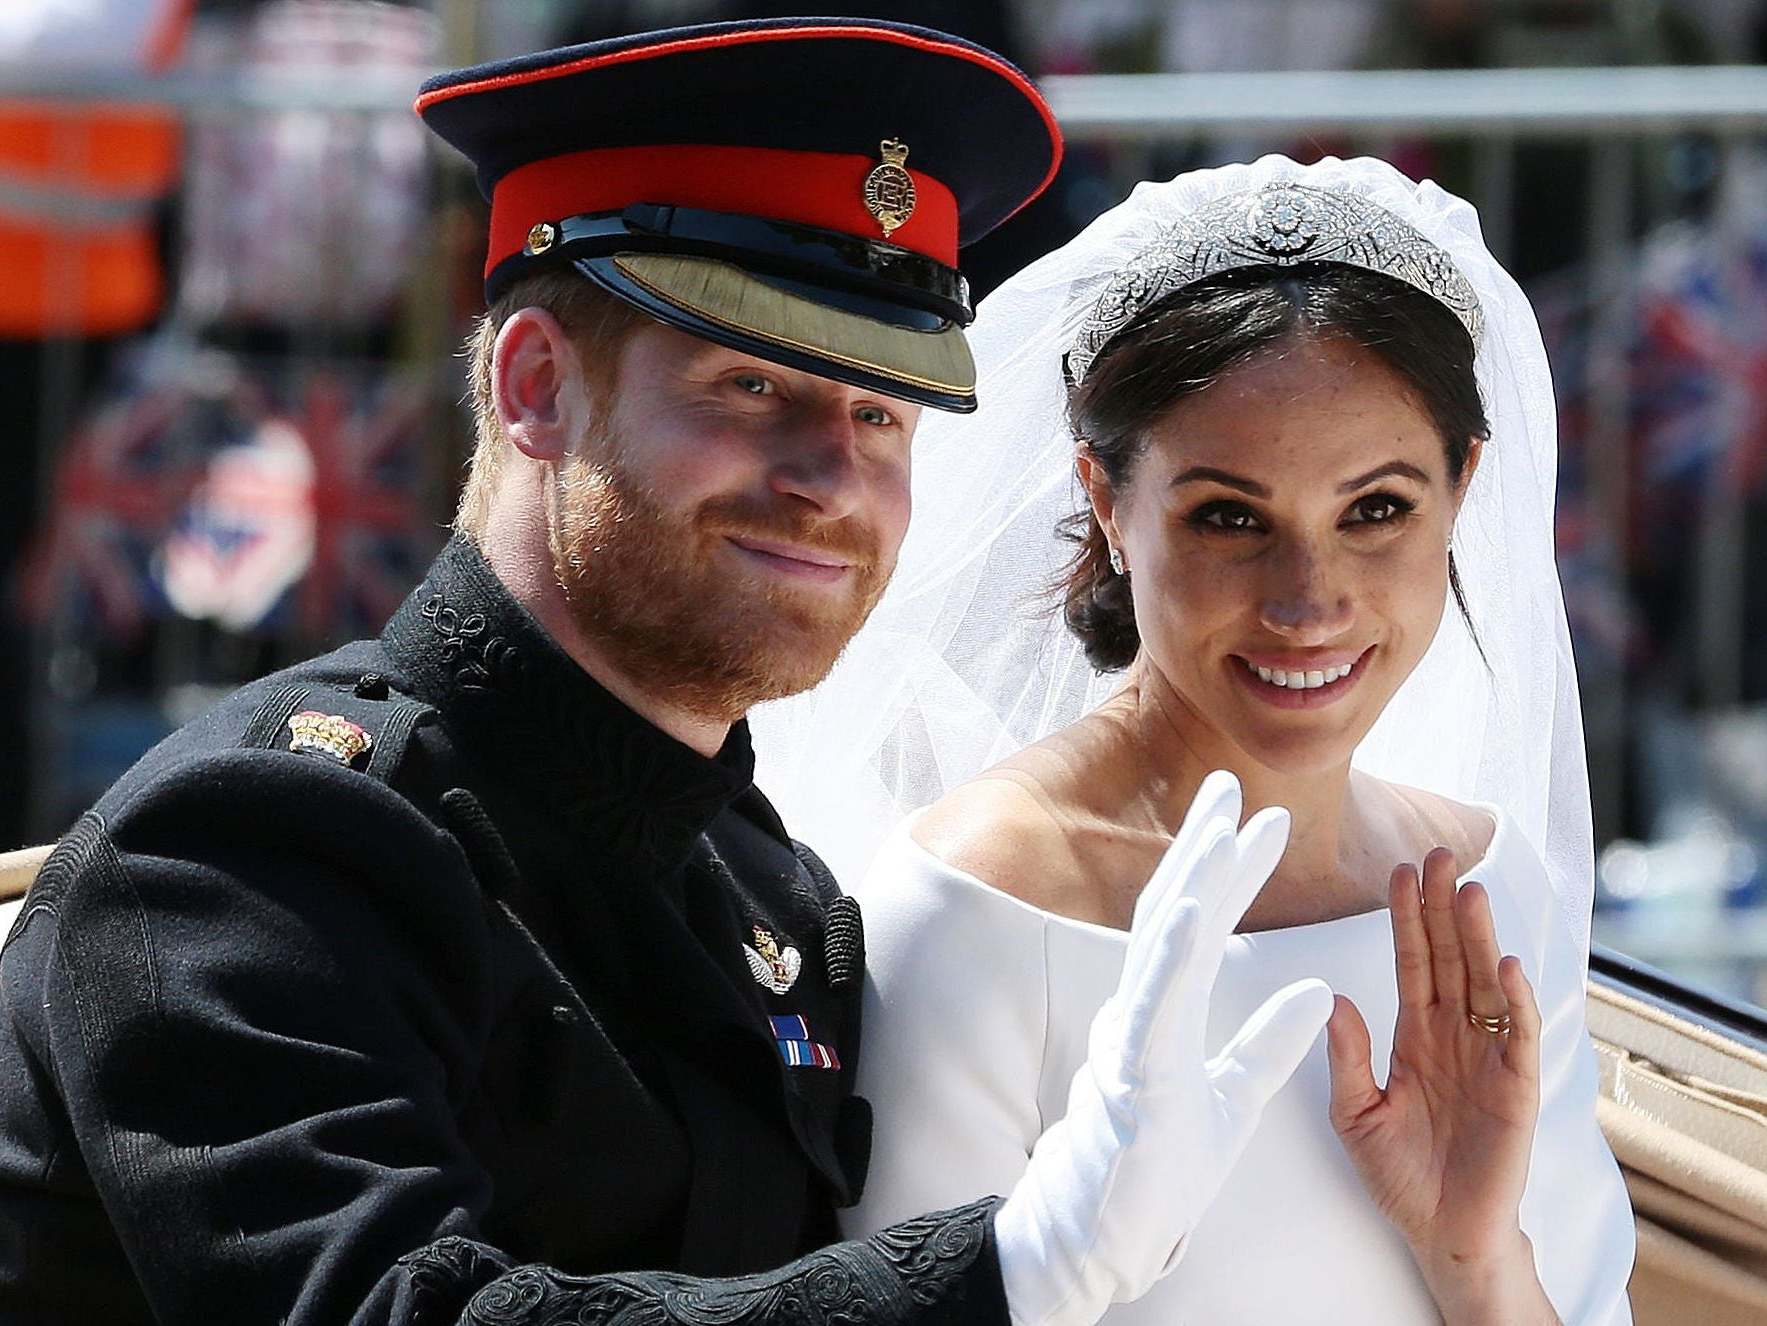 The Duke and Duchess of Sussex on their wedding day, 19 May, 2018